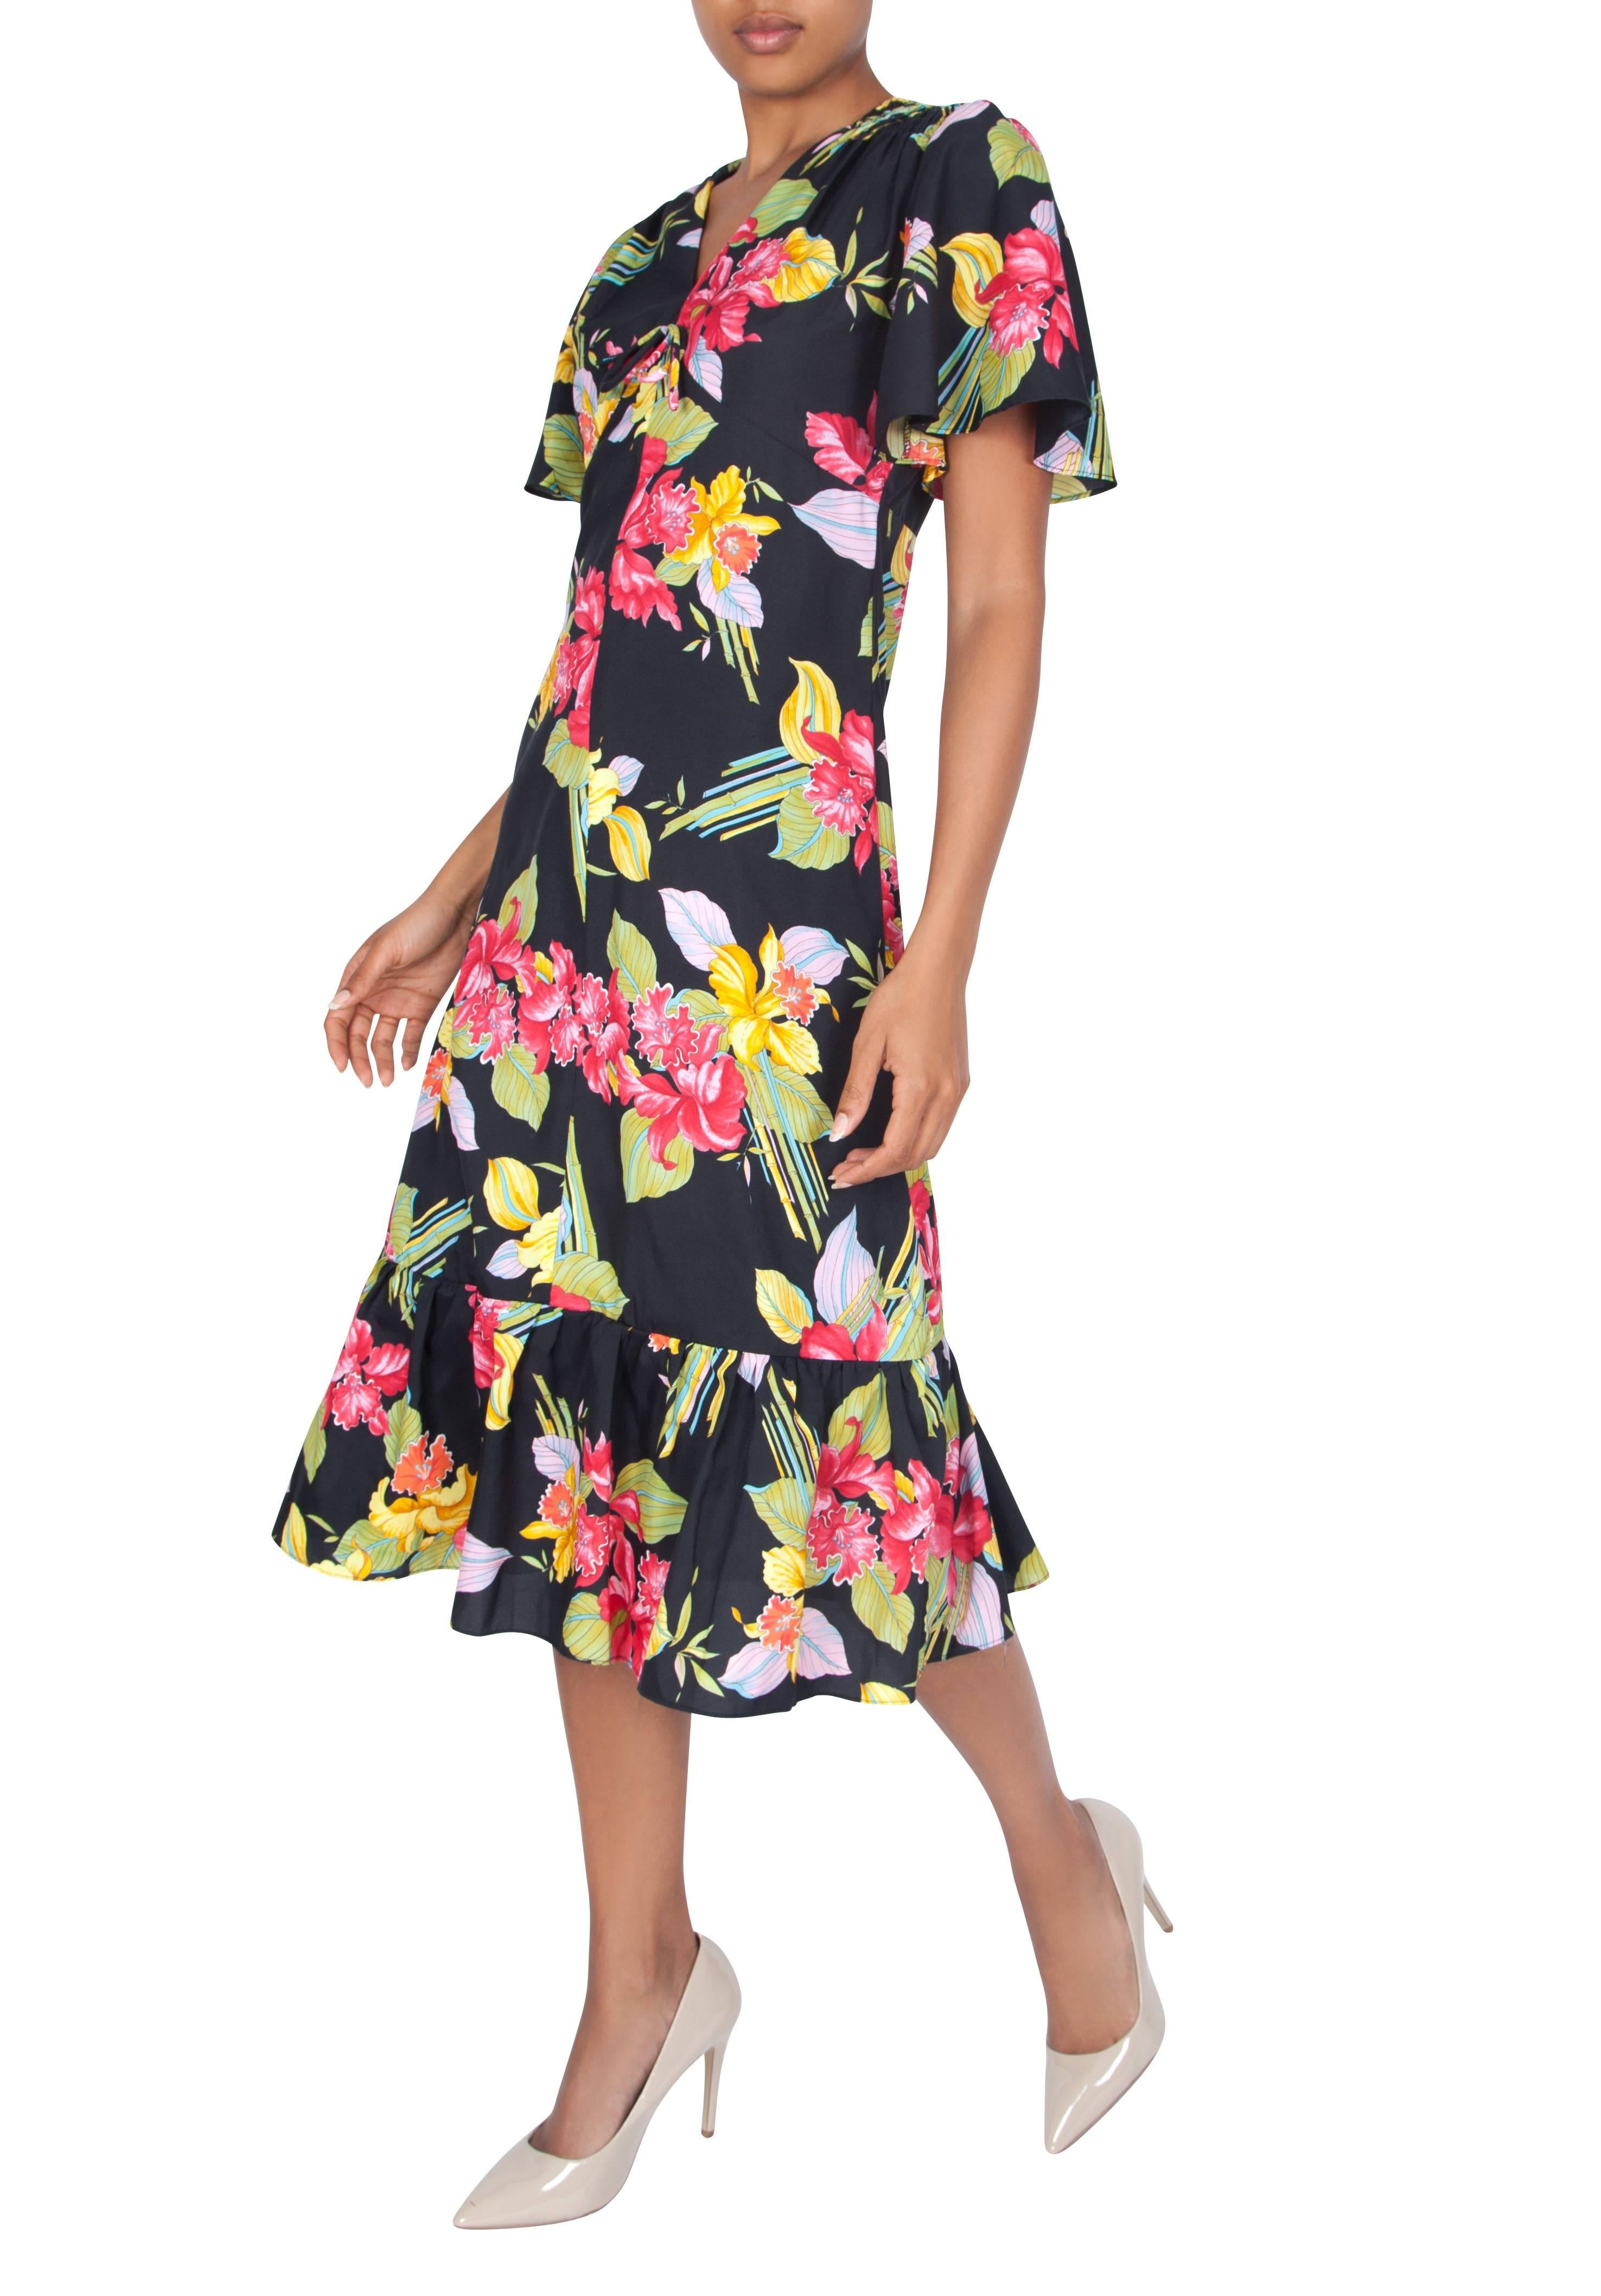 A feminine and versatile 1970's black dress with pink and yellow floral pattern, featuring a slight ruching on the shoulders from which flared sleeves come forming a capelet-like shape. The empire line accommodates the bust in a semi-circular cut